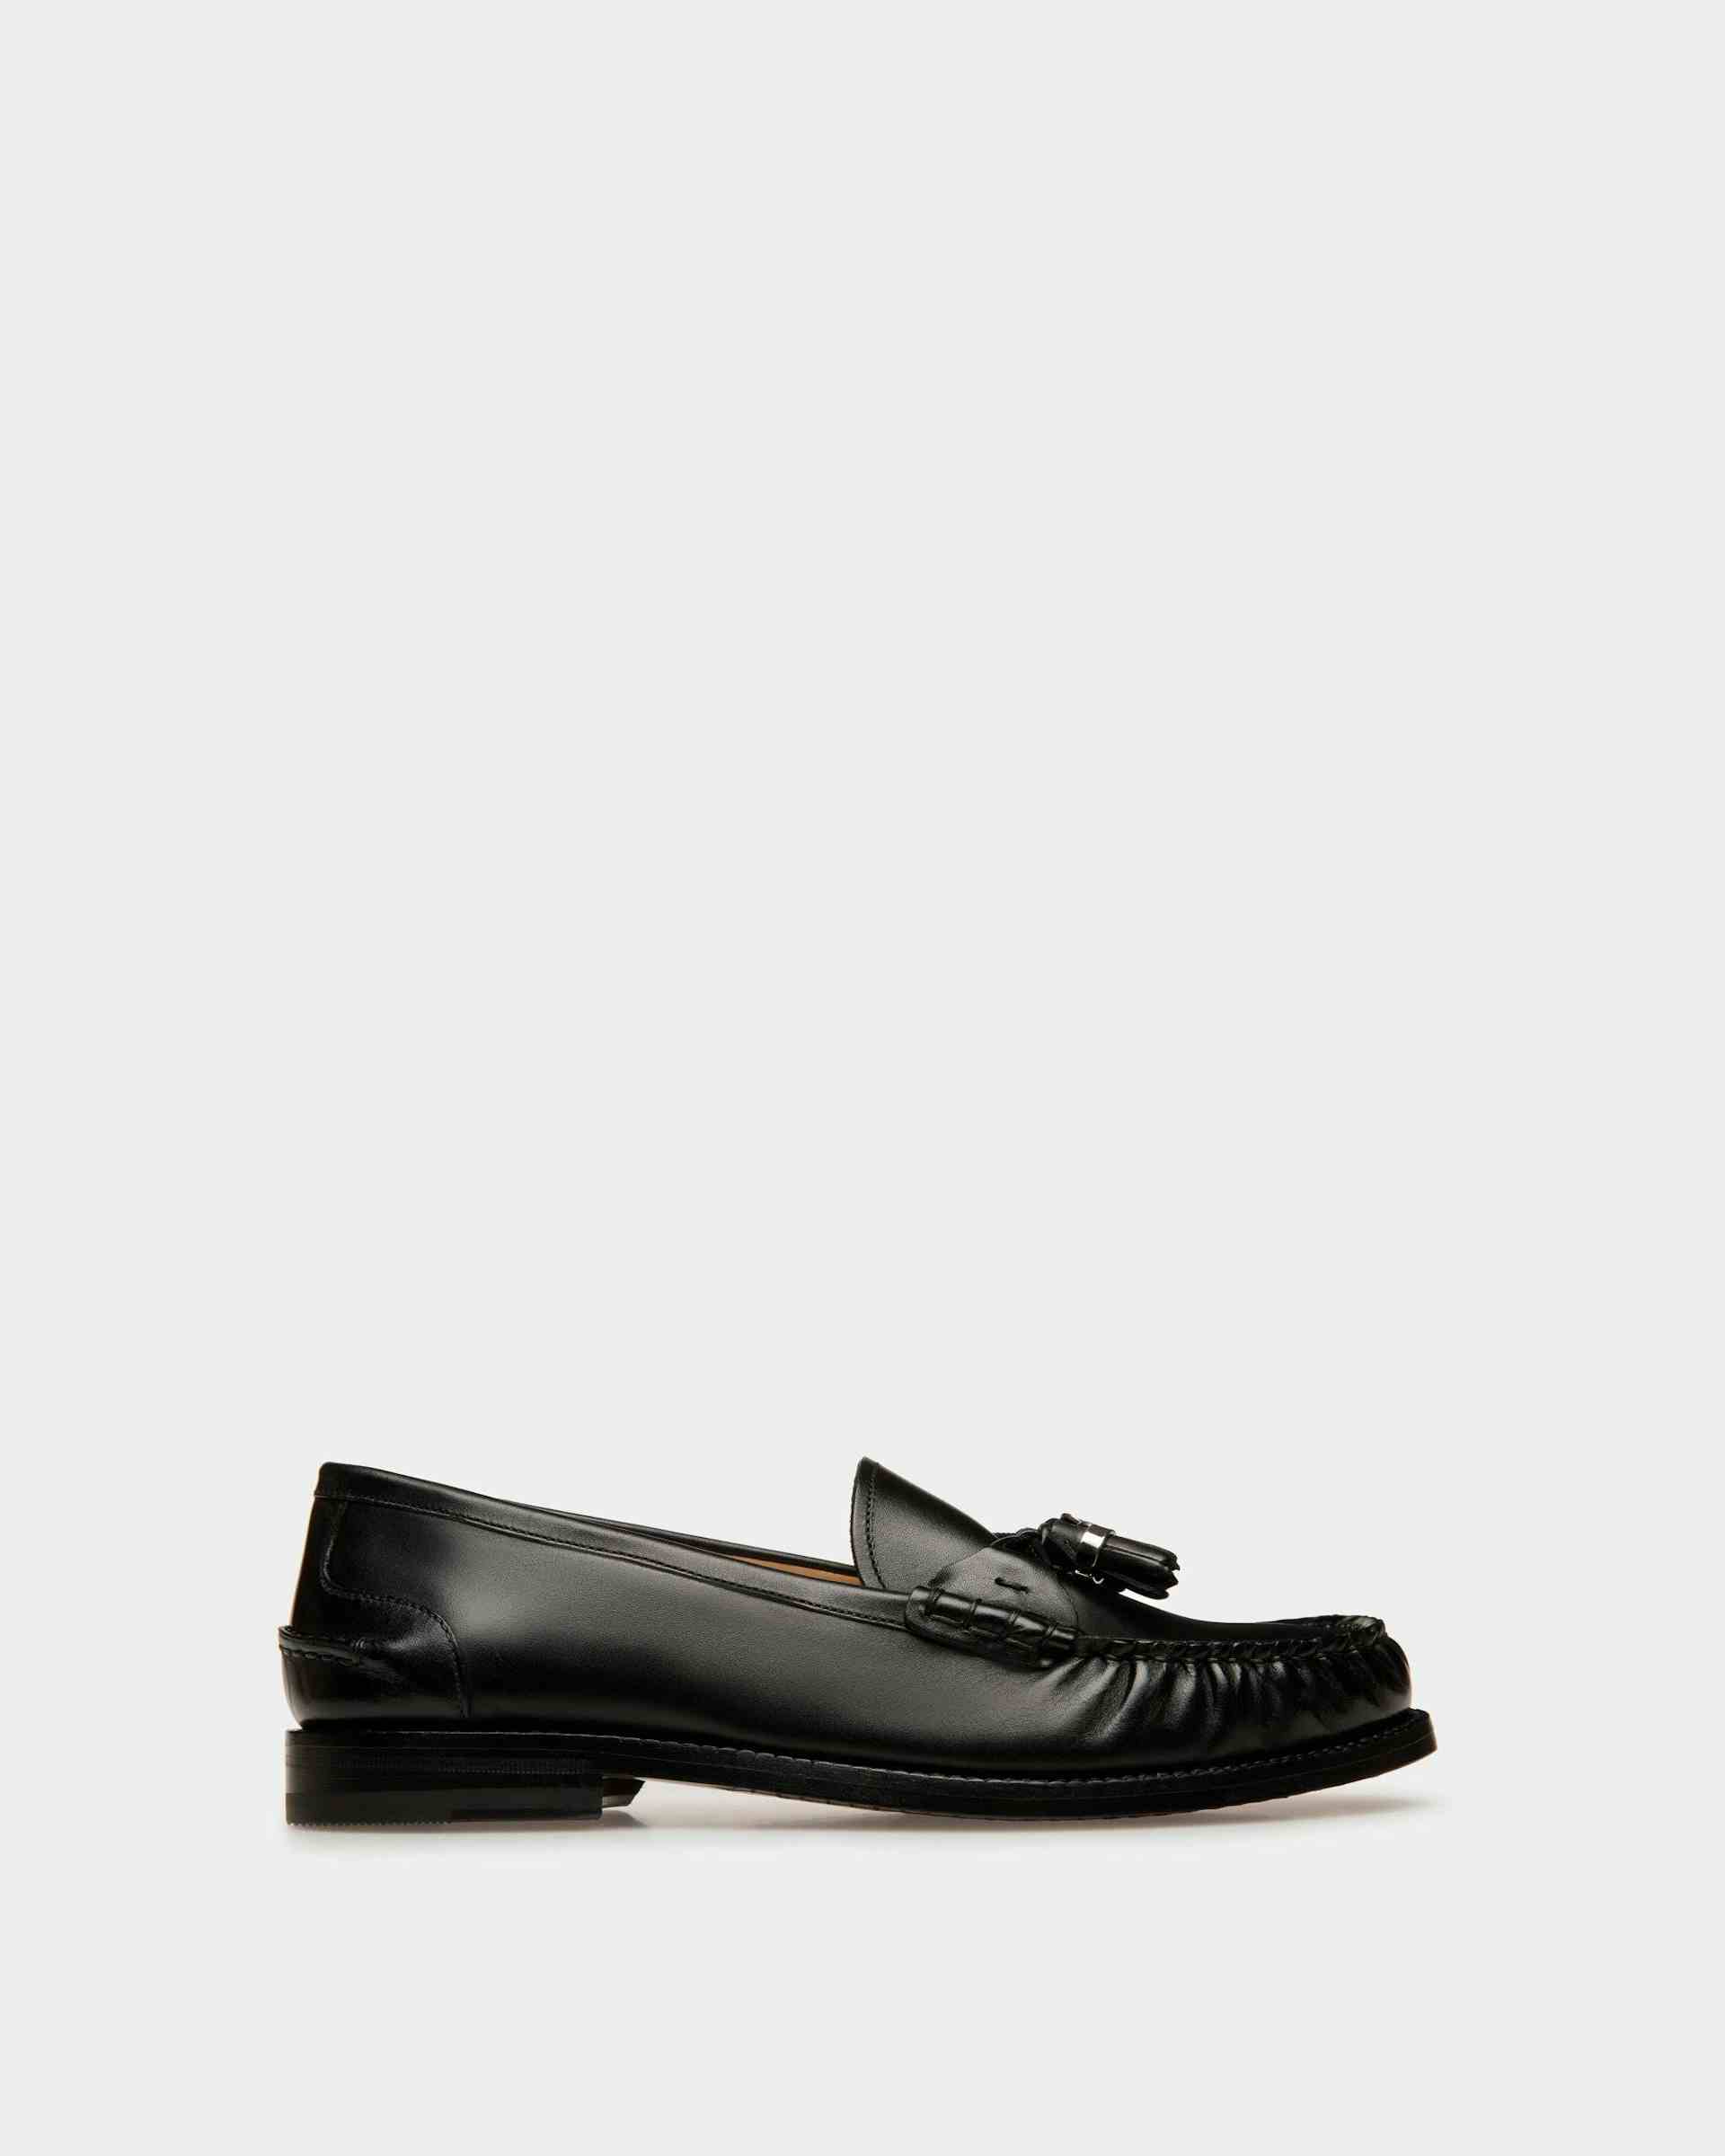 Rome Moccasins In Black Leather - Women's - Bally